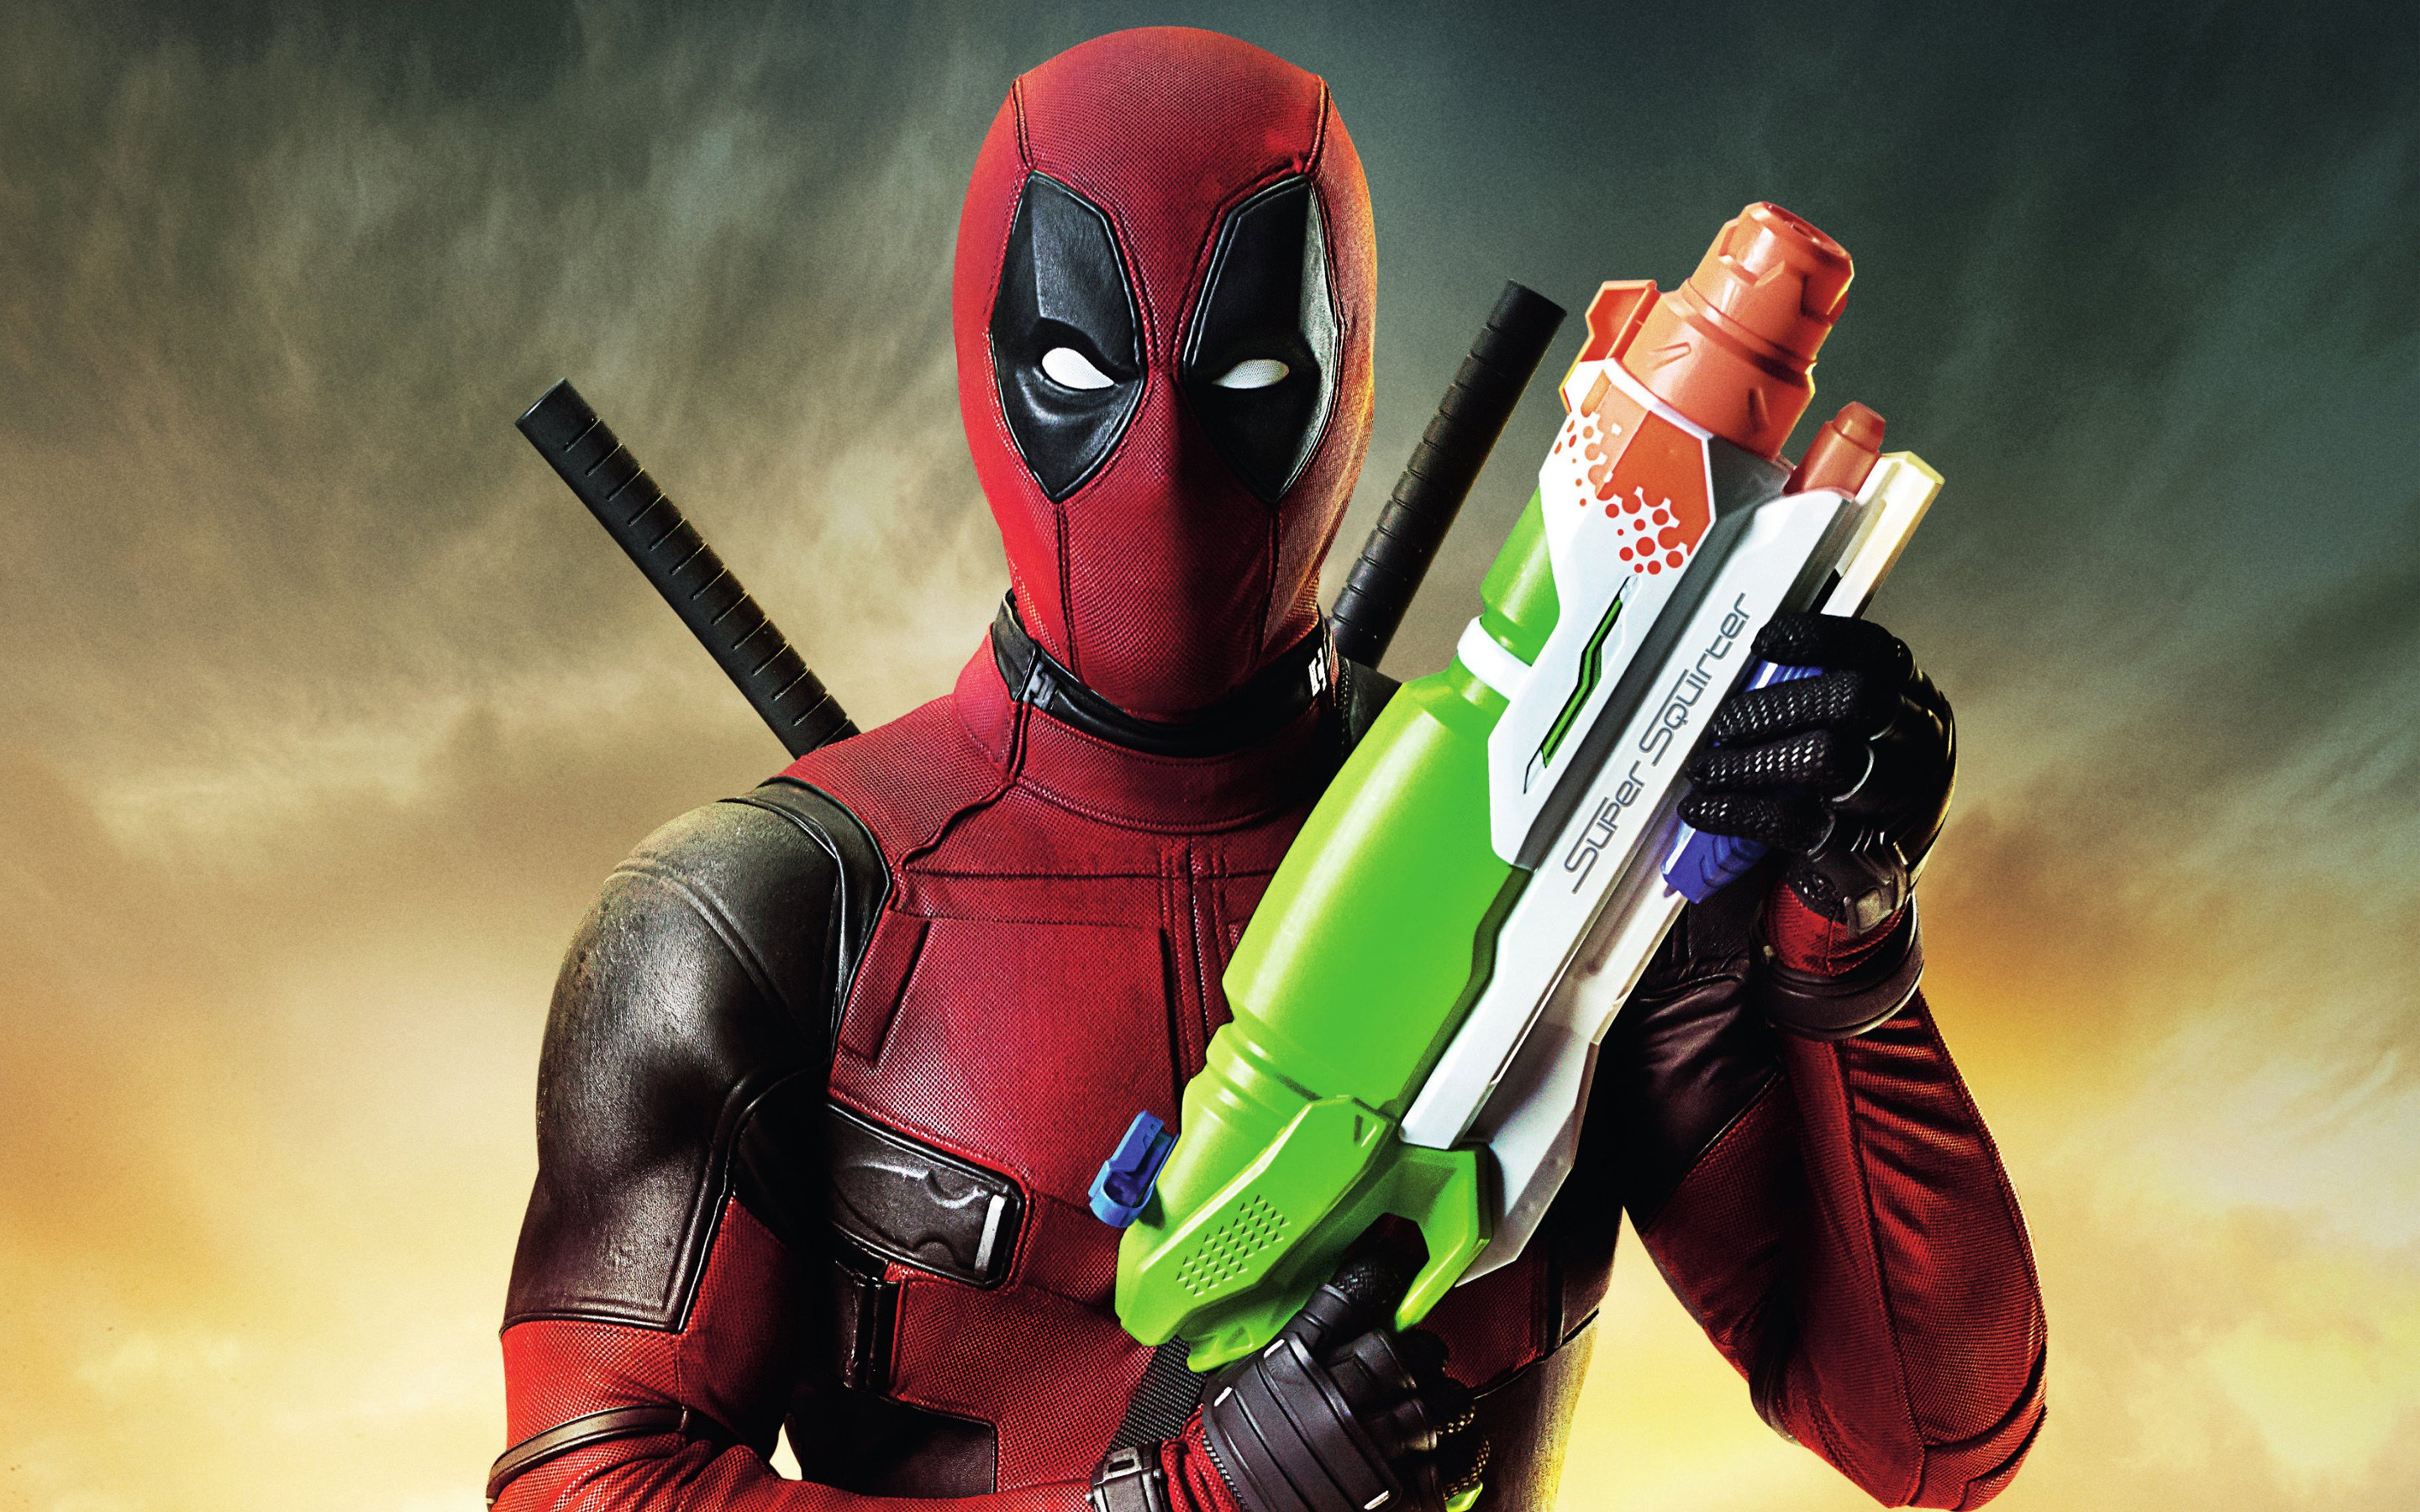 2880x1800 Deadpool Movie Wallpaper - Wallpapers Browse ...